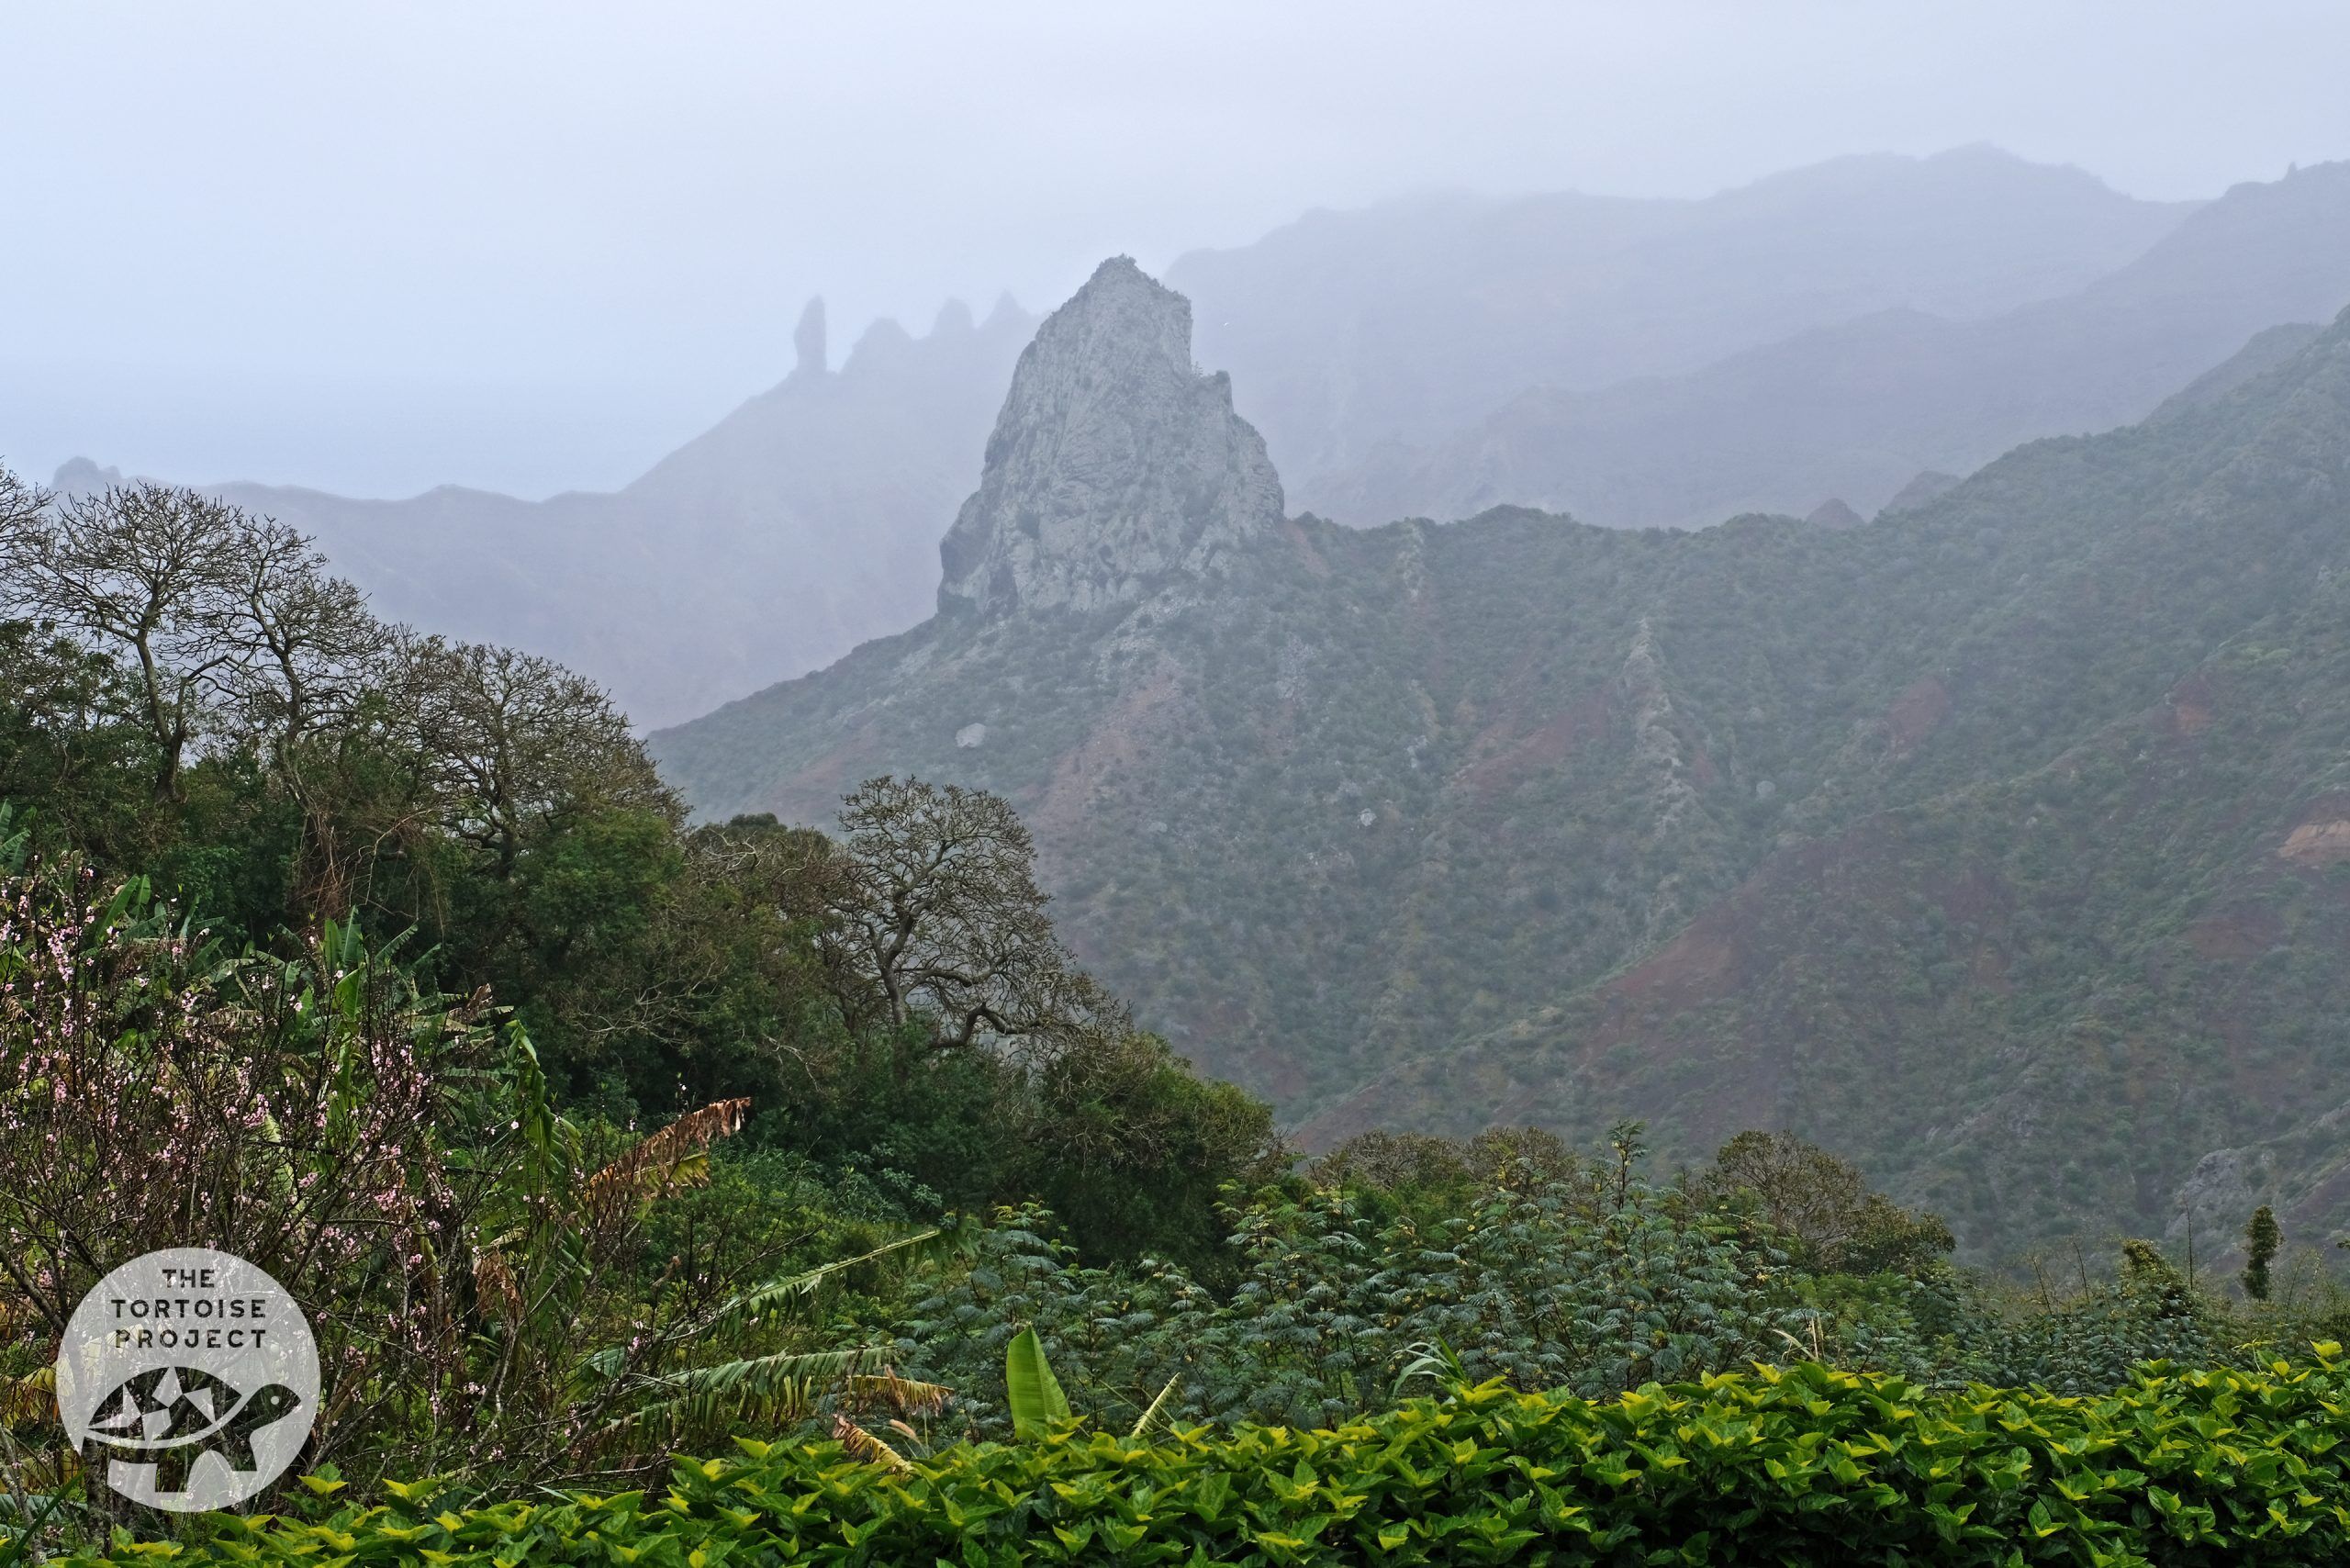 Above Sandy Bay on the island of Saint Helena. The rock formation in the foreground is Lot, borne of volcanic activity and erosion. Behind Lot, on the left, is Lot's Wife (the remains of a volcanic dyke). Between them are are Gorilla's Head and The Ass's Ears.